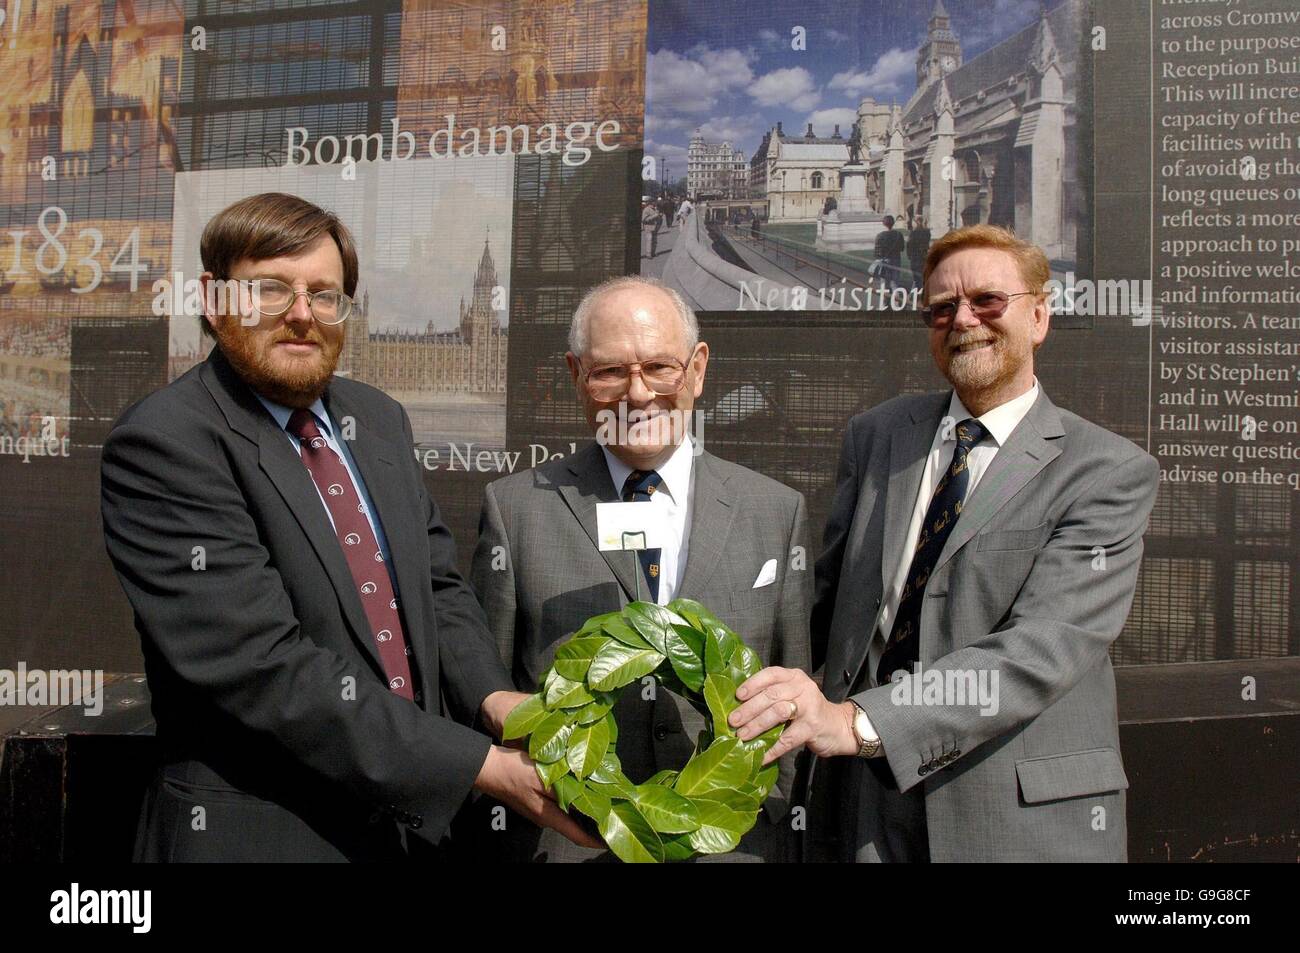 Dr Peter Gaunt (left), Edgar Samuel and Professor Barry Coward (right) hold a memorial wreath on behalf of the Cromwell Association, outside the Houses of Parliament in central London. The wreath is to be laid in the chapel at the Houses of Parliament to mark the anniversary of Oliver Cromwell's death. Stock Photo